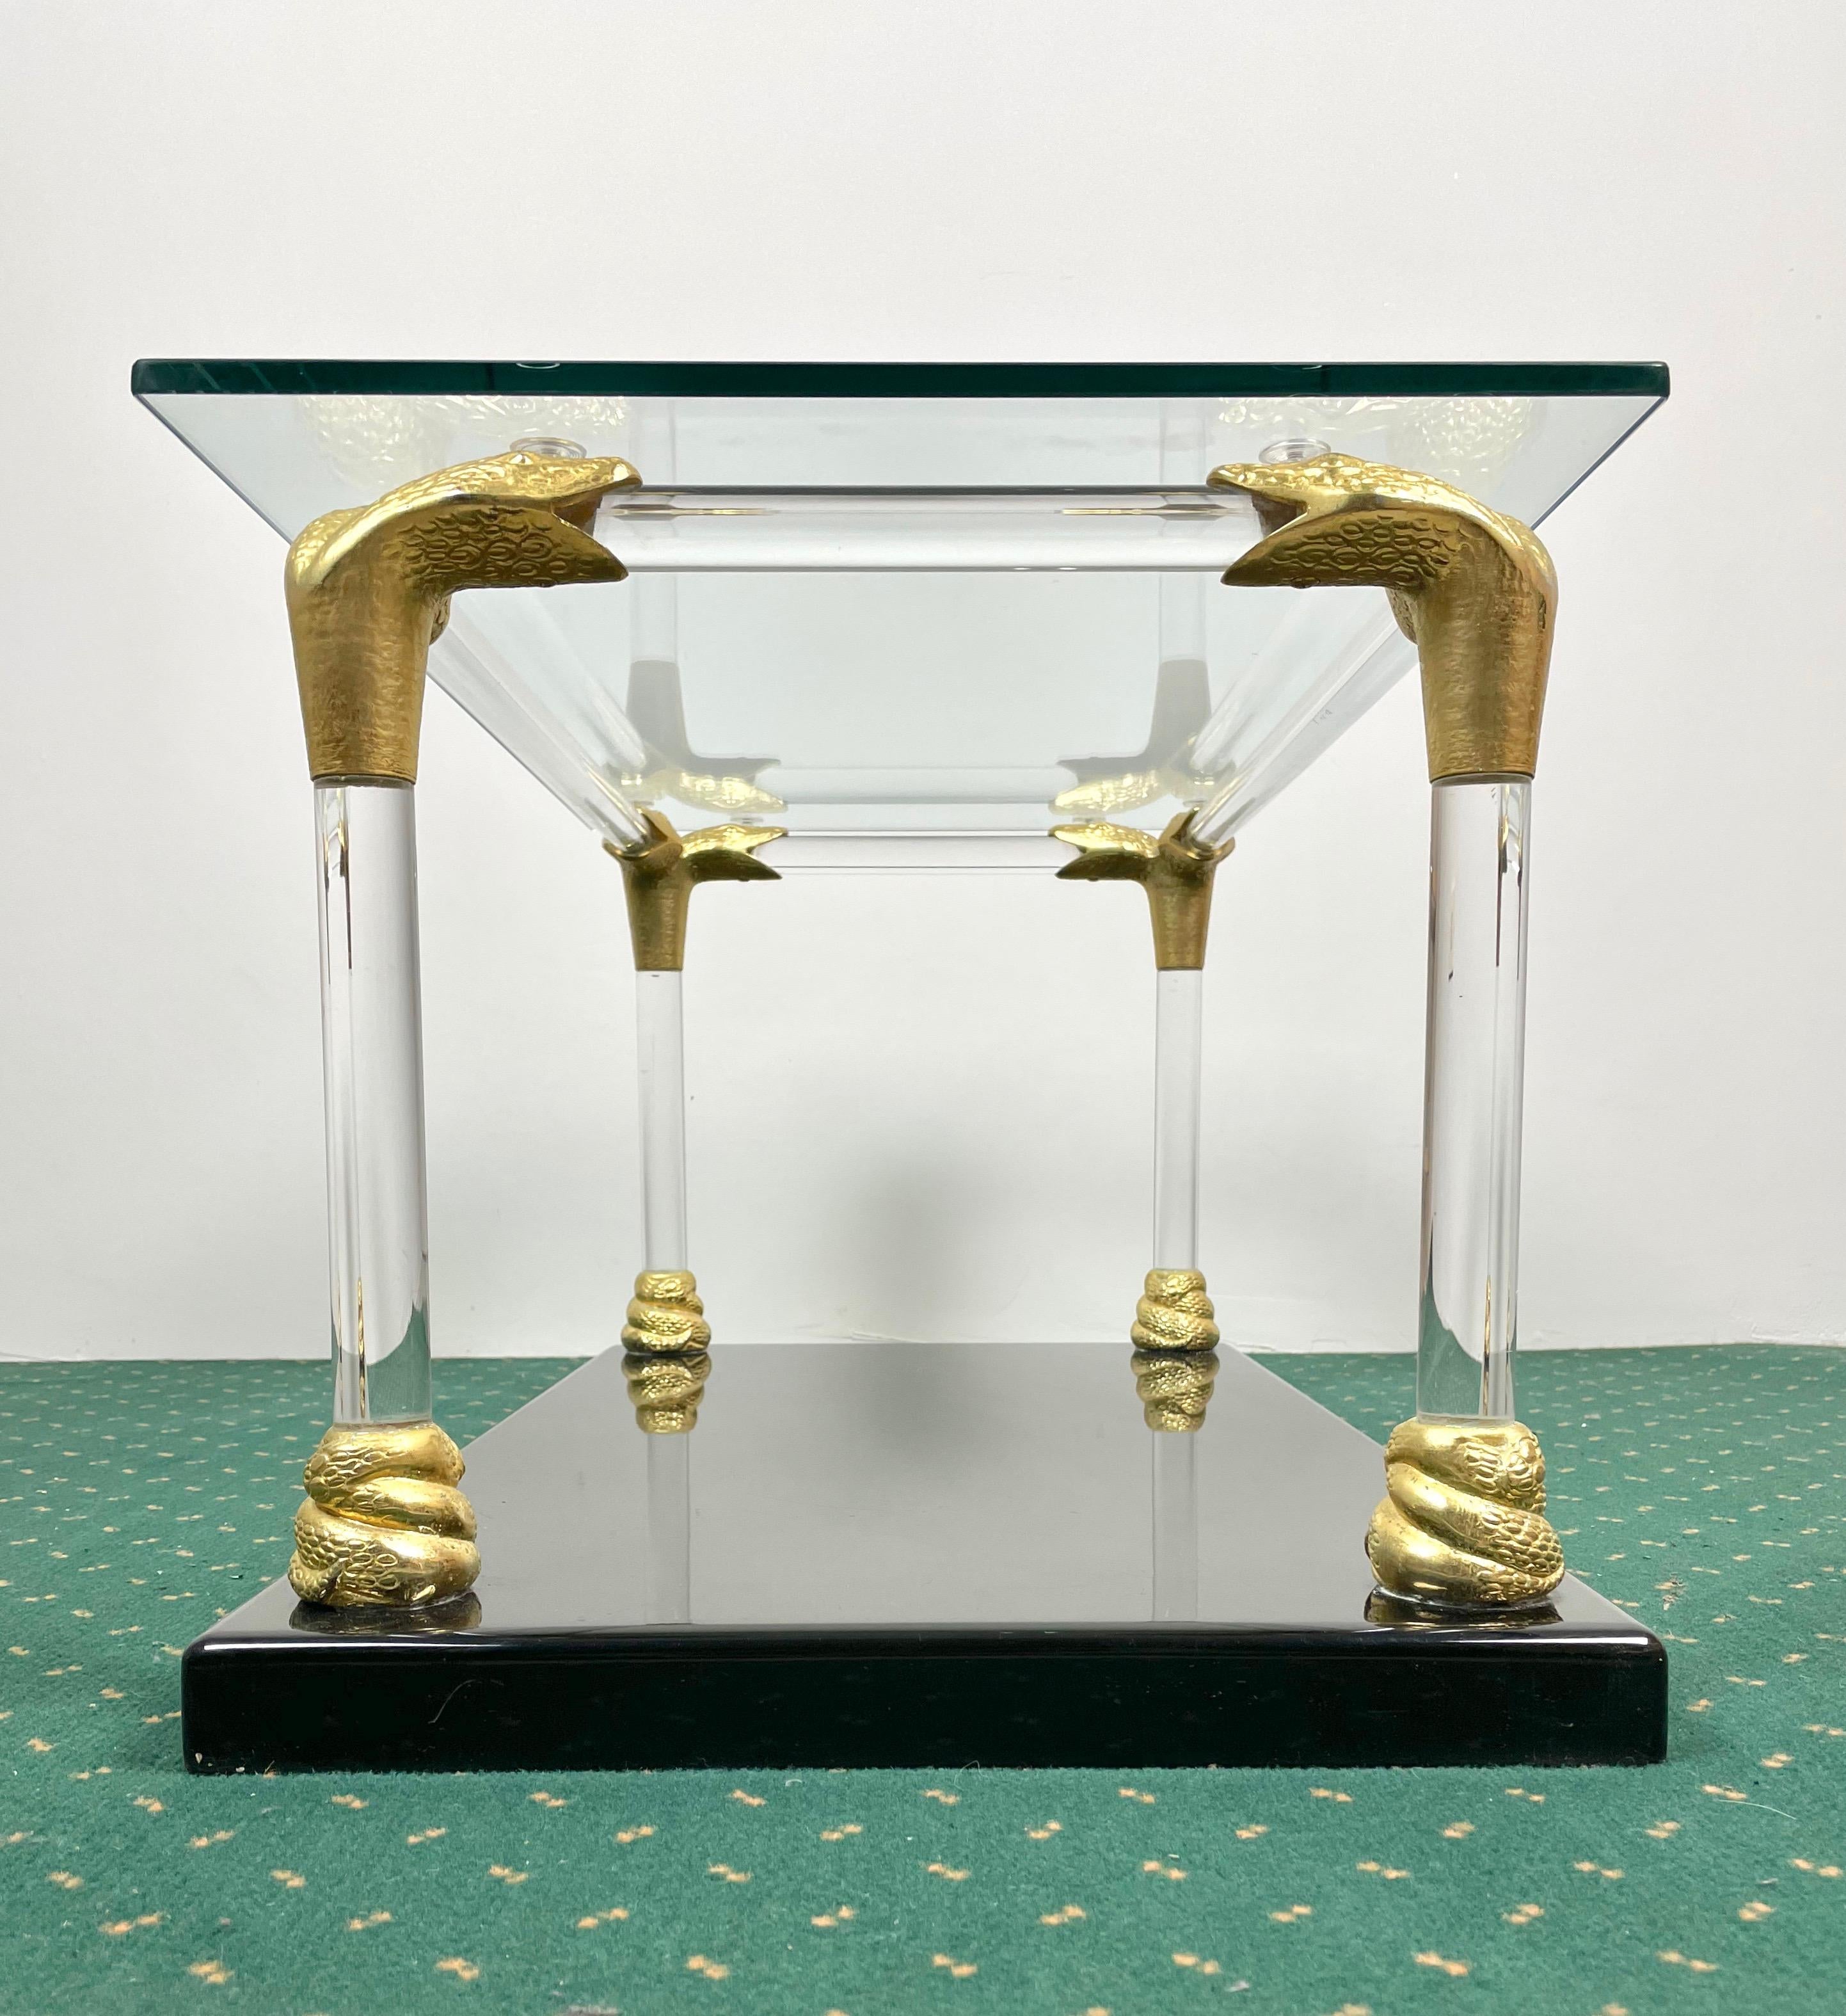 Italian Lucite, Wood and Brass Coffee Table with Snake Head Details, Italy, 1970s For Sale